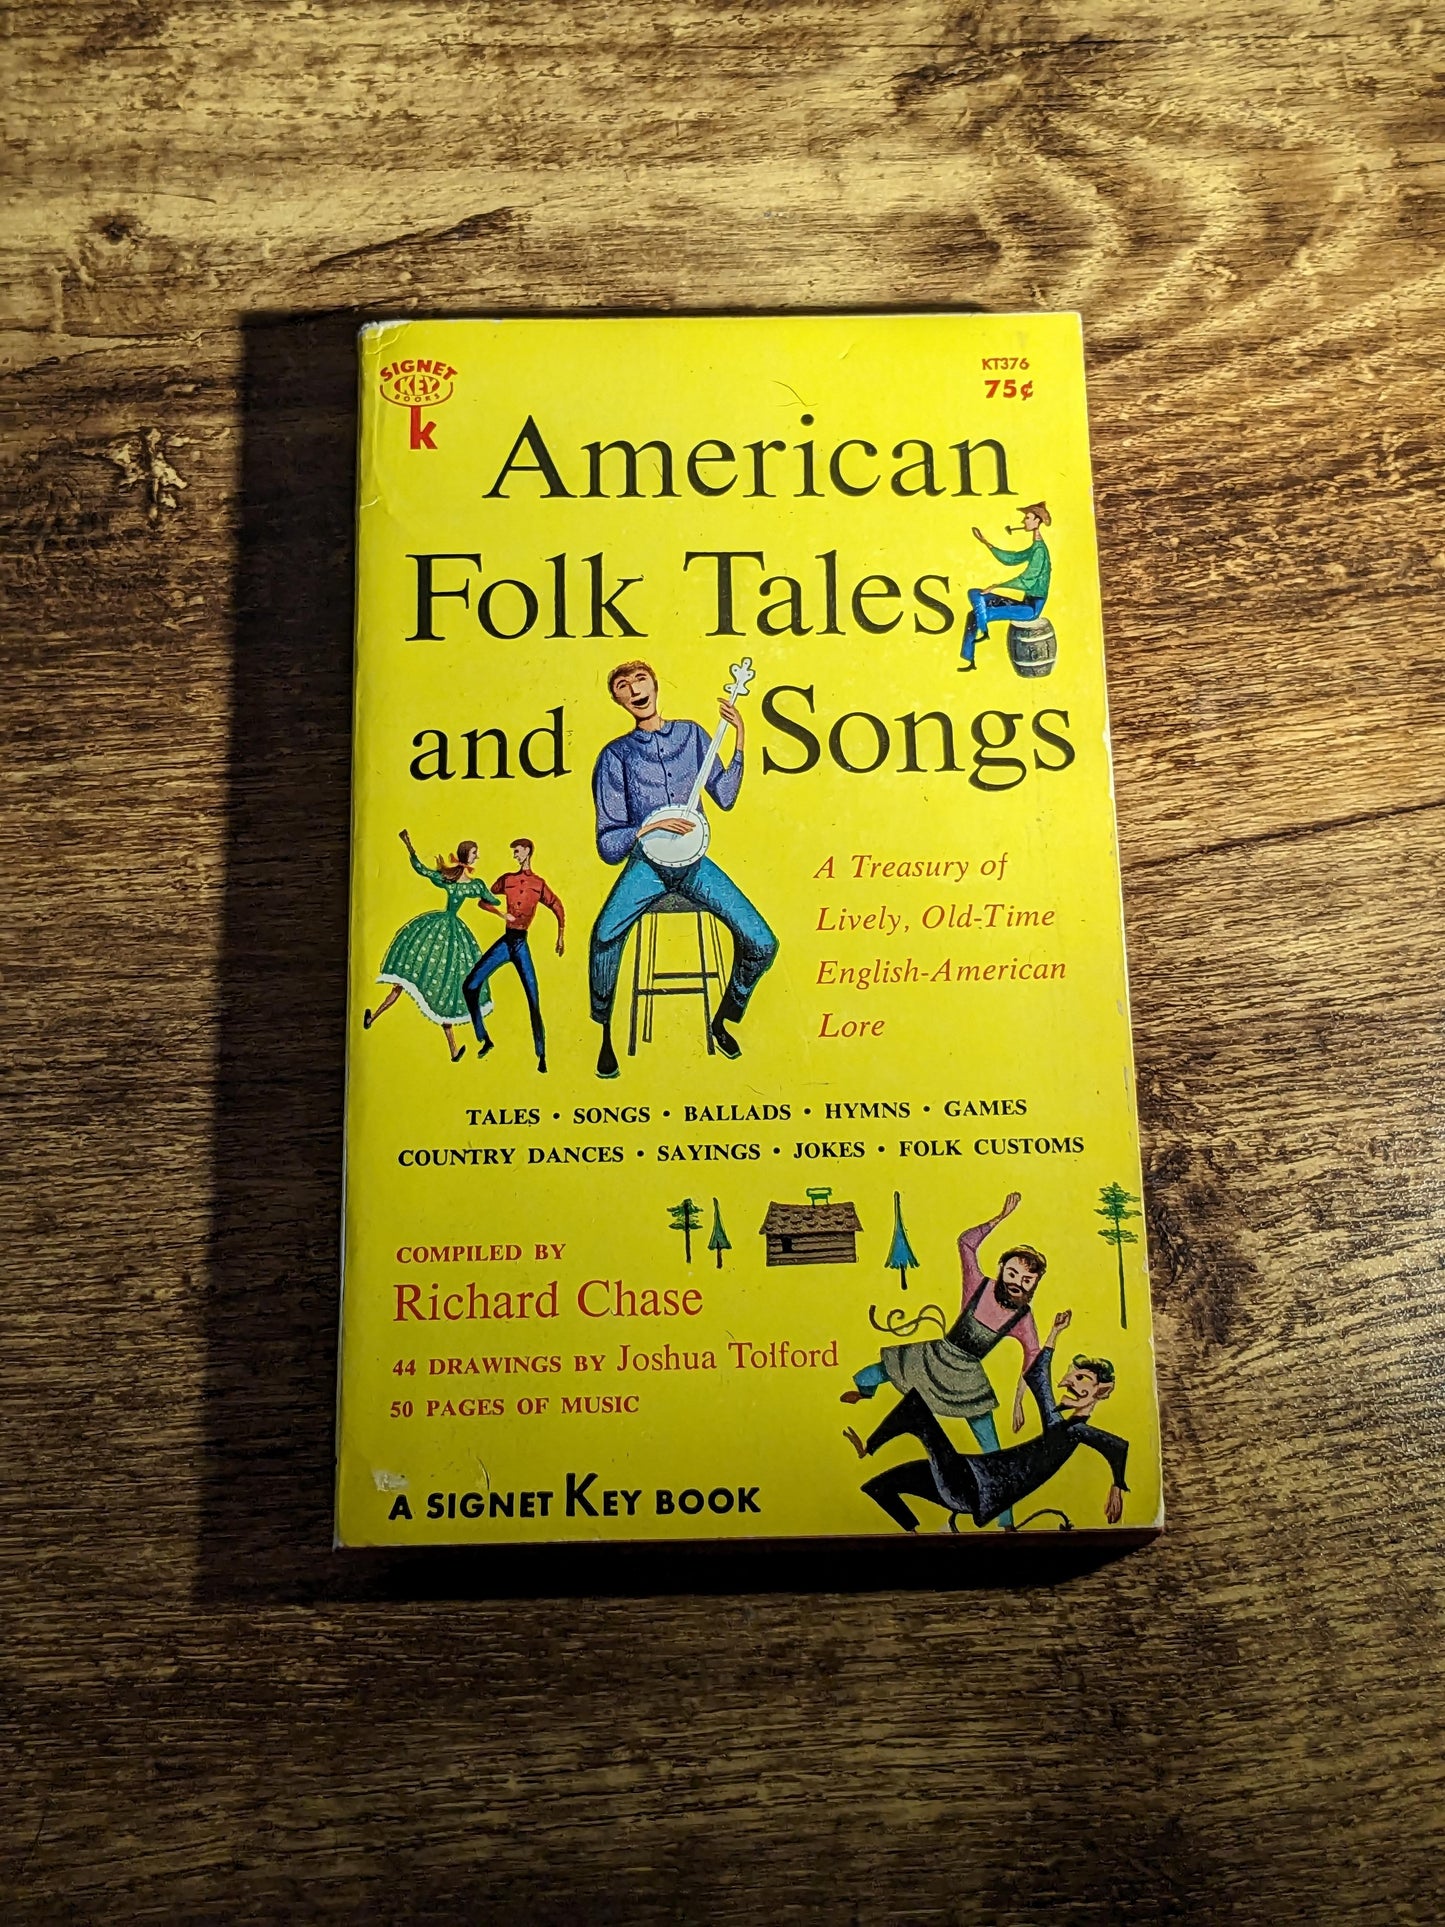 American Folk Tales and Songs compiled by Richard Chase (1956) - Asylum Books